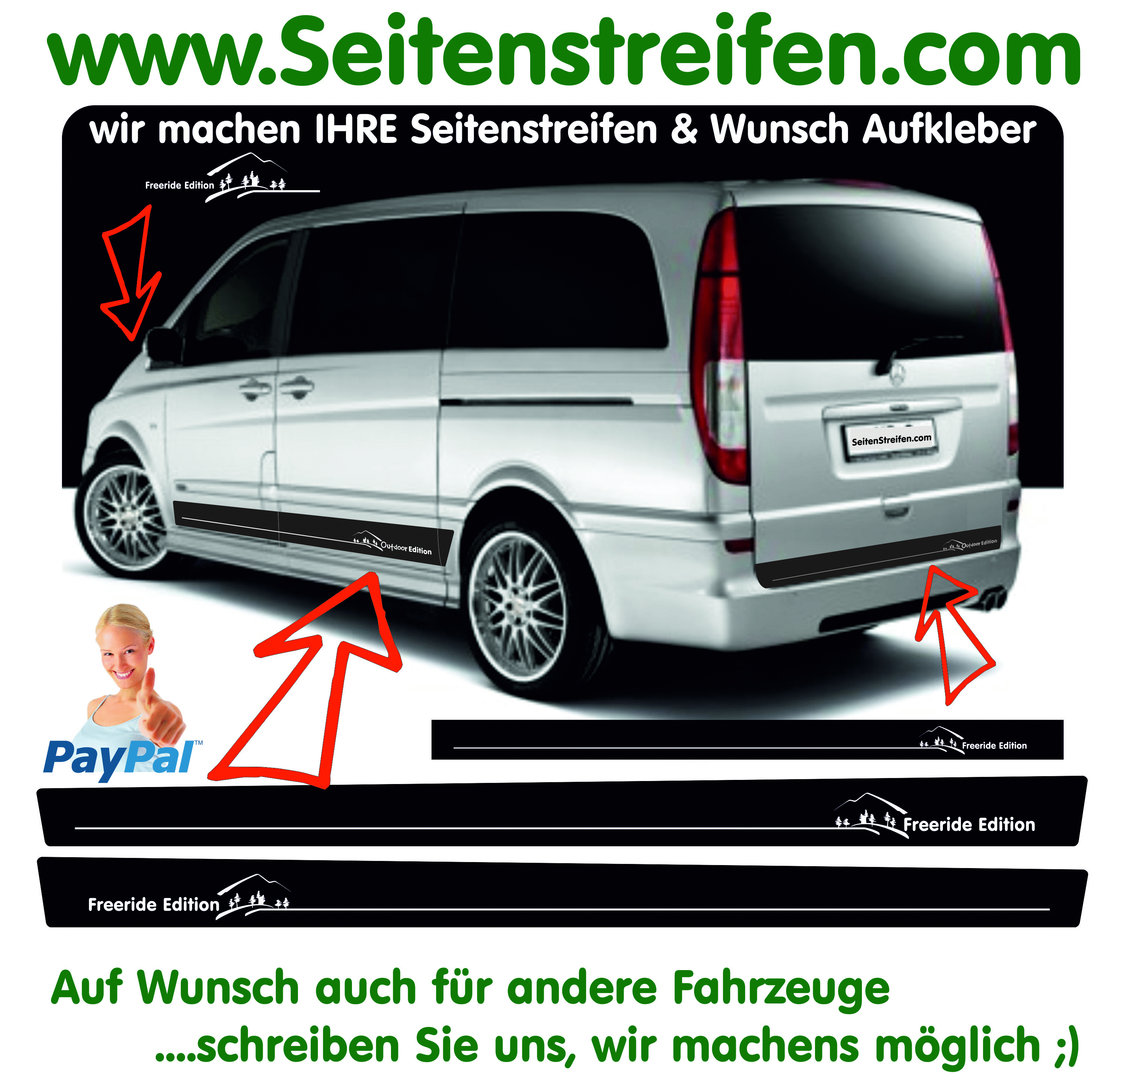 Mercedes Benz Vito & Viano - Freeride Edition - Side Stripes Graphics Decals Sticker Kit - N° 9677